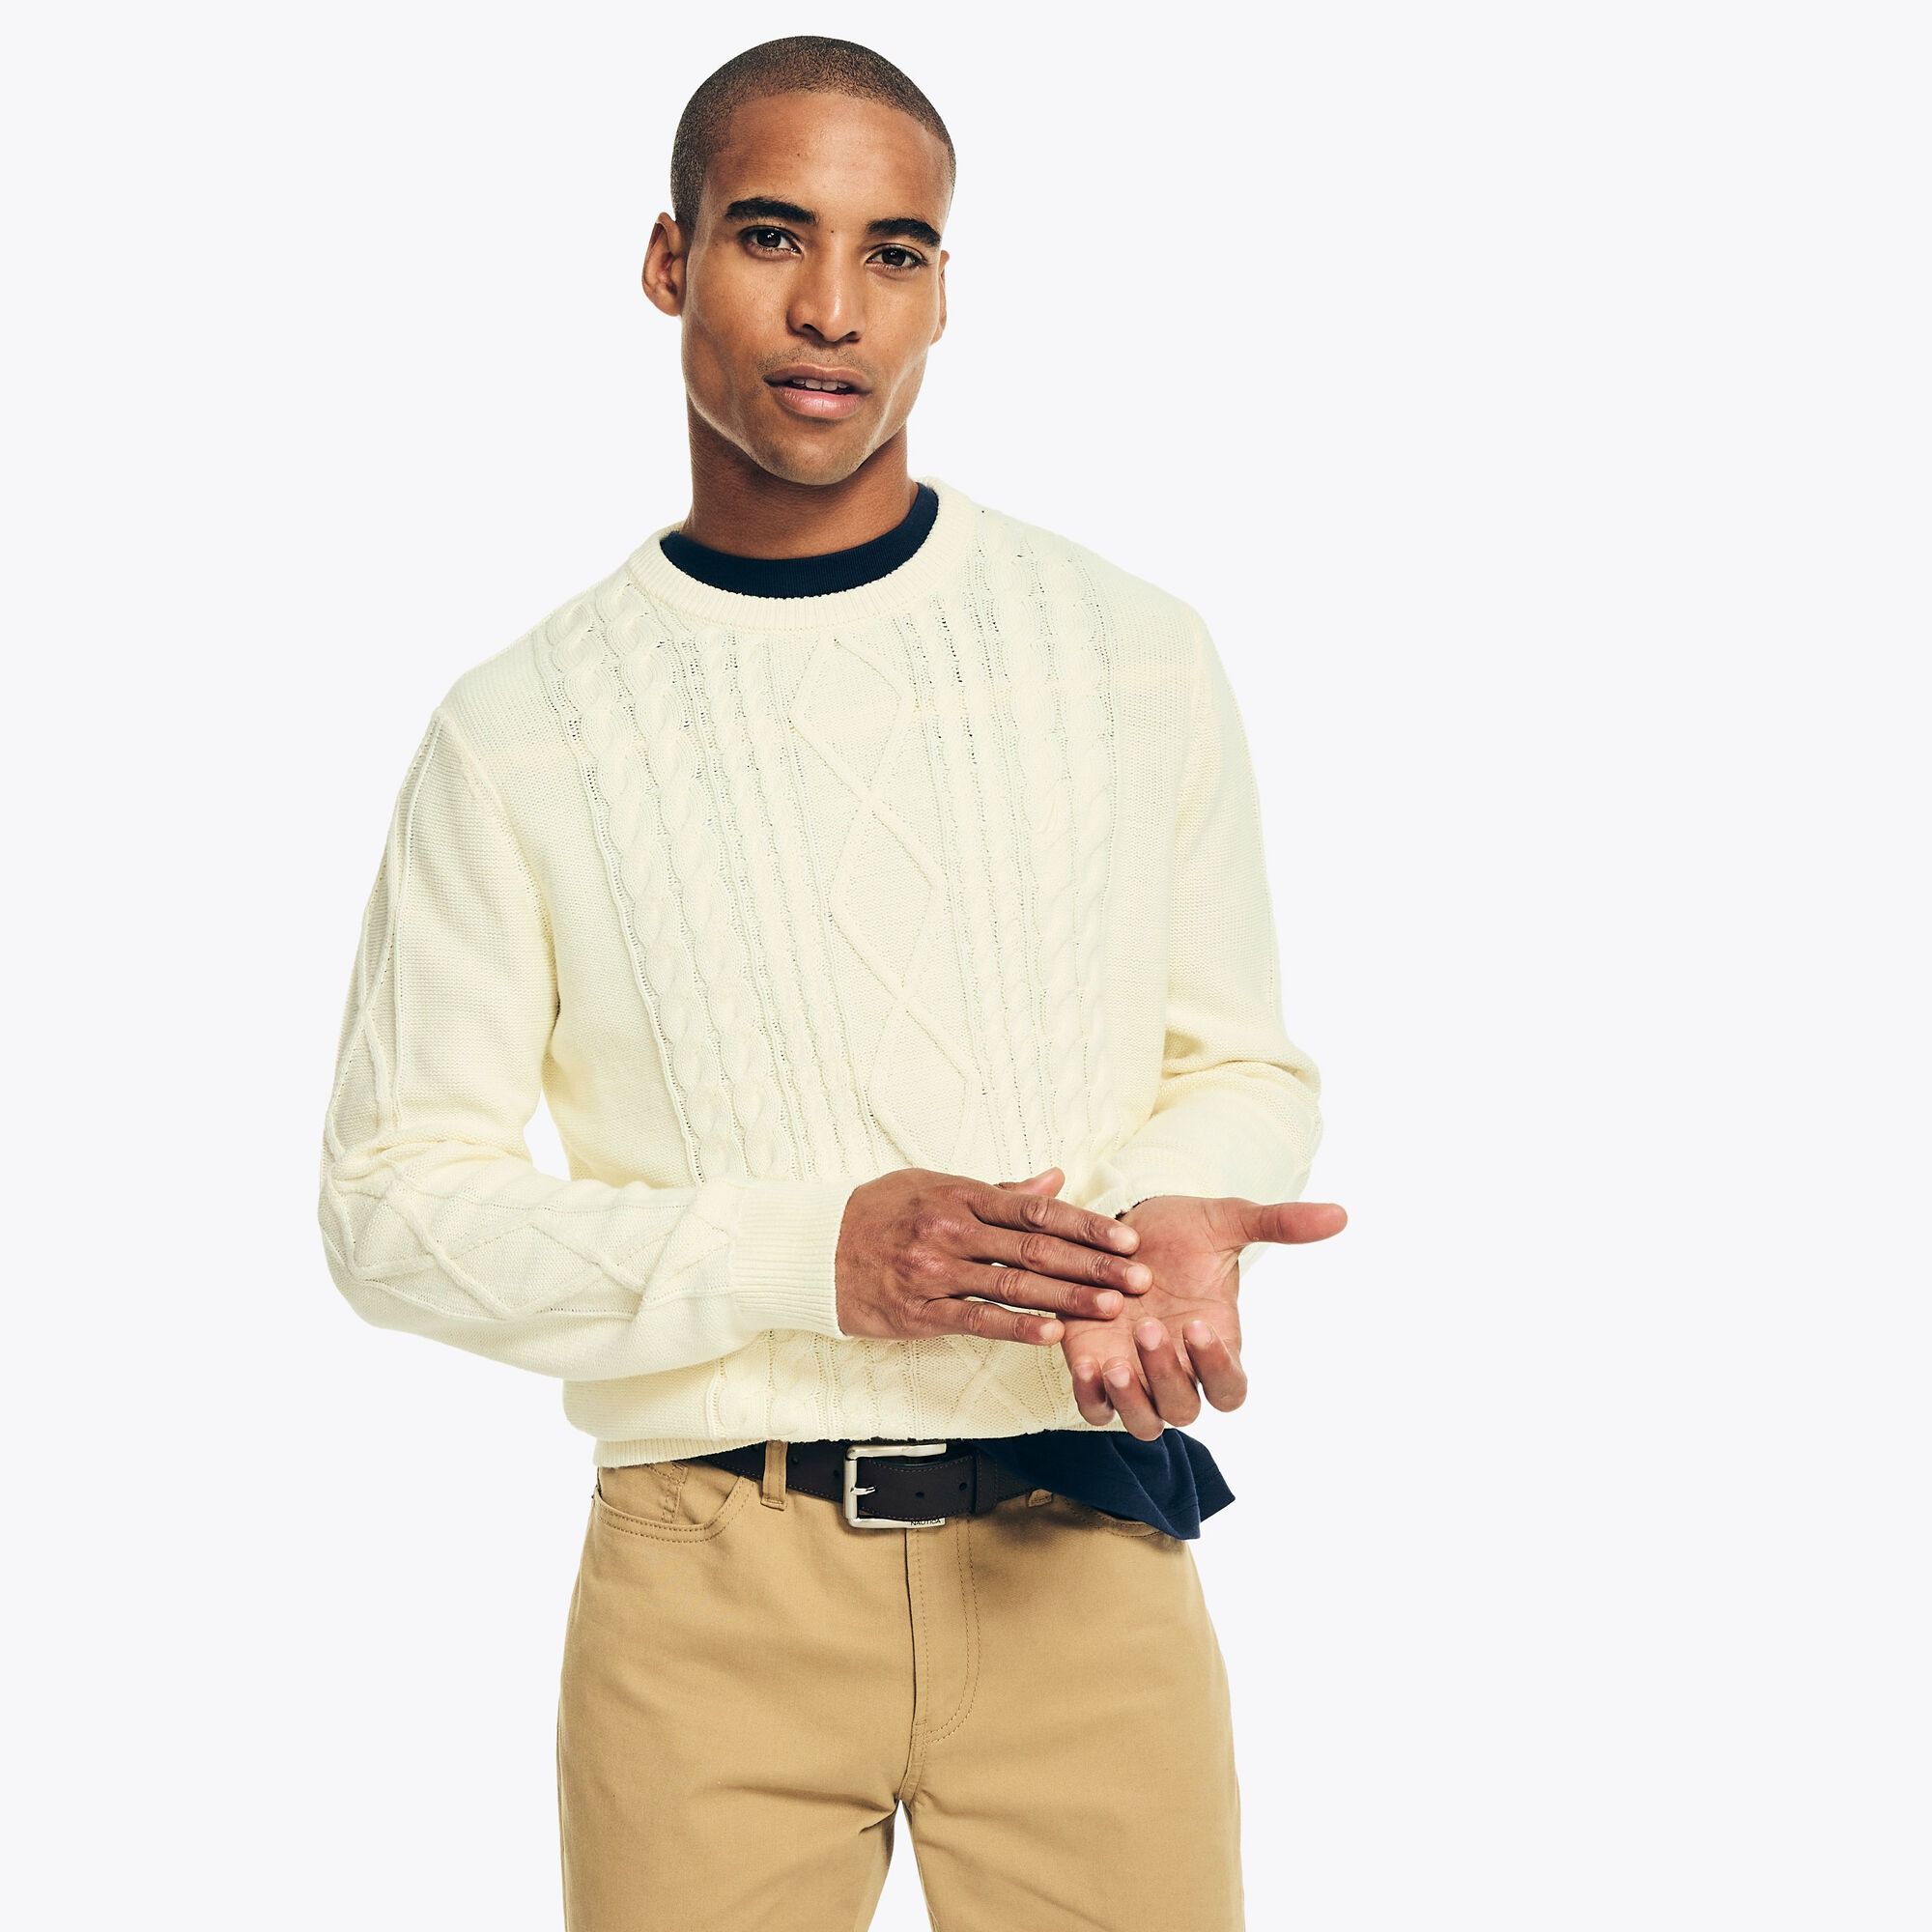 The 16 Best Cable Knit Sweaters for Men, According to a Fashion Expert